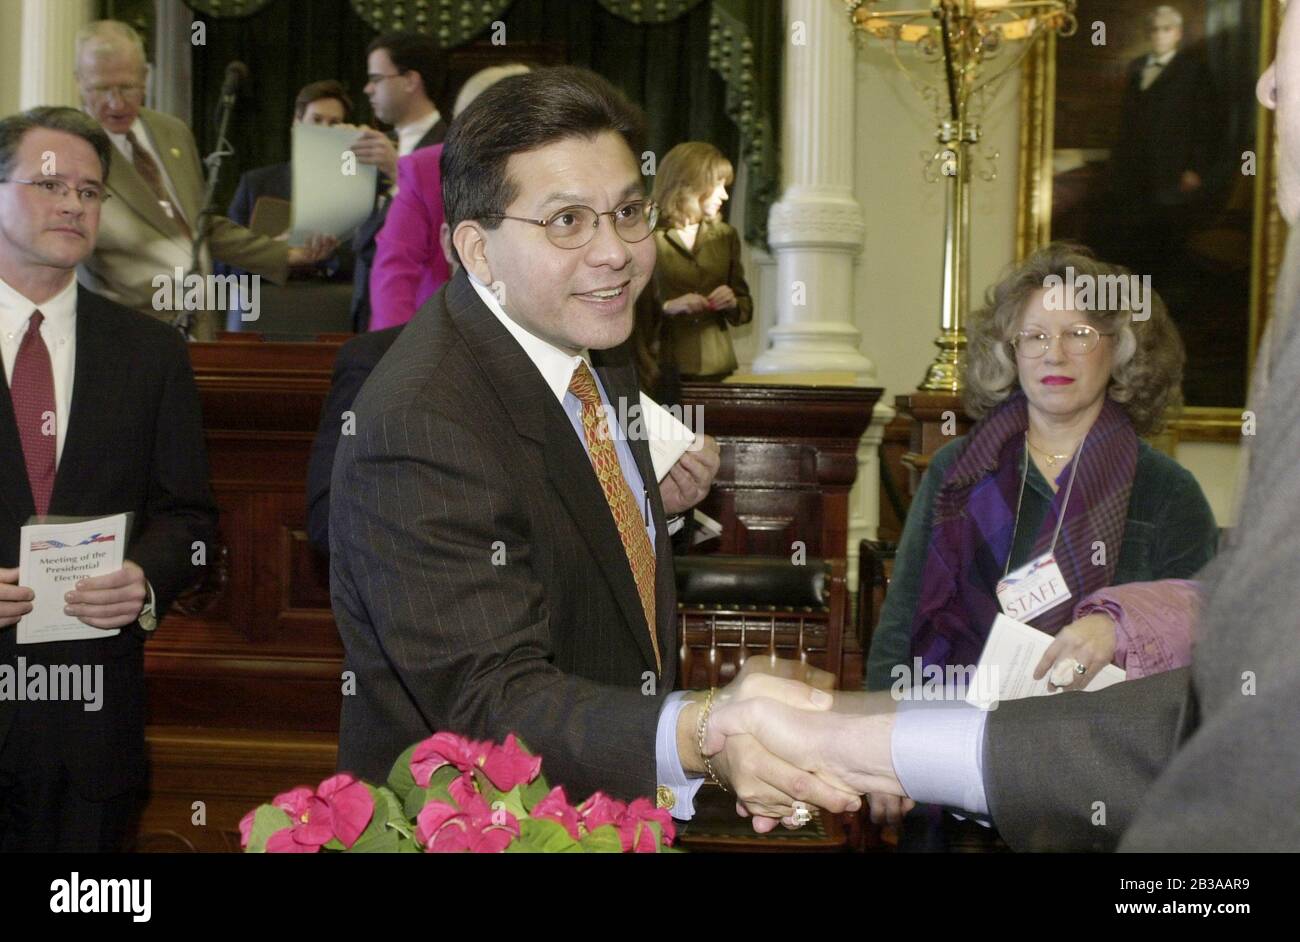 Austin, Texas  USA, 18 DEC 2000: Texas Supreme Court Justice Al Gonzalez of Houston is congratulated after being appointed by President-elect George w. Bush as General Counsel at the White House in the new Bush administration. ©Bob Daemmrich Stock Photo